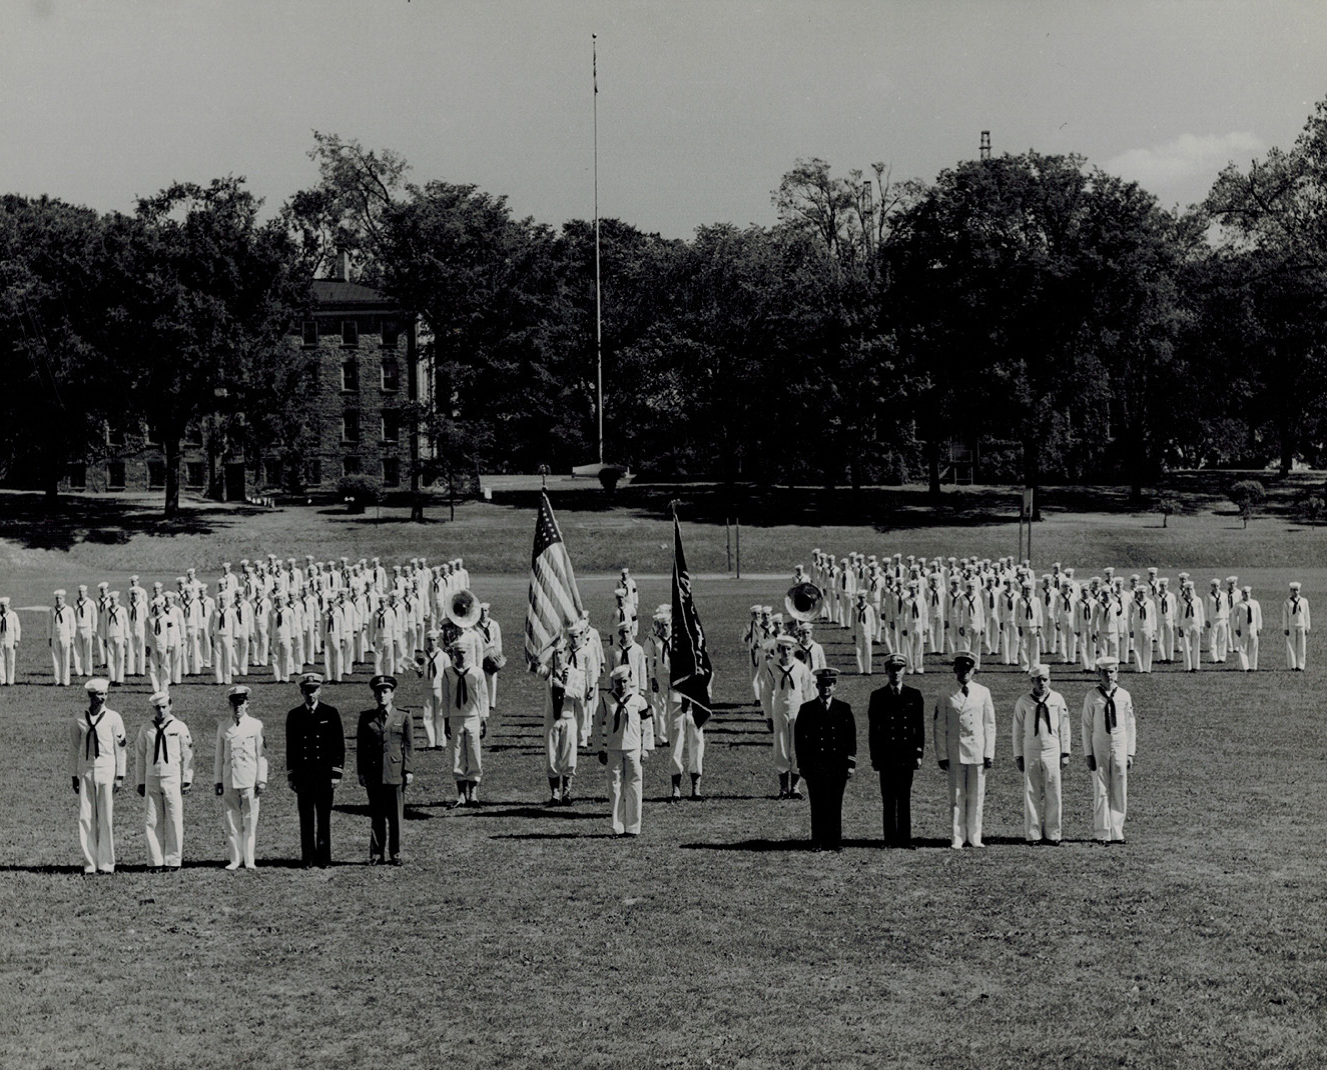 The Navy V-12 Unit in formation on the Quad, ca. 1944–45.